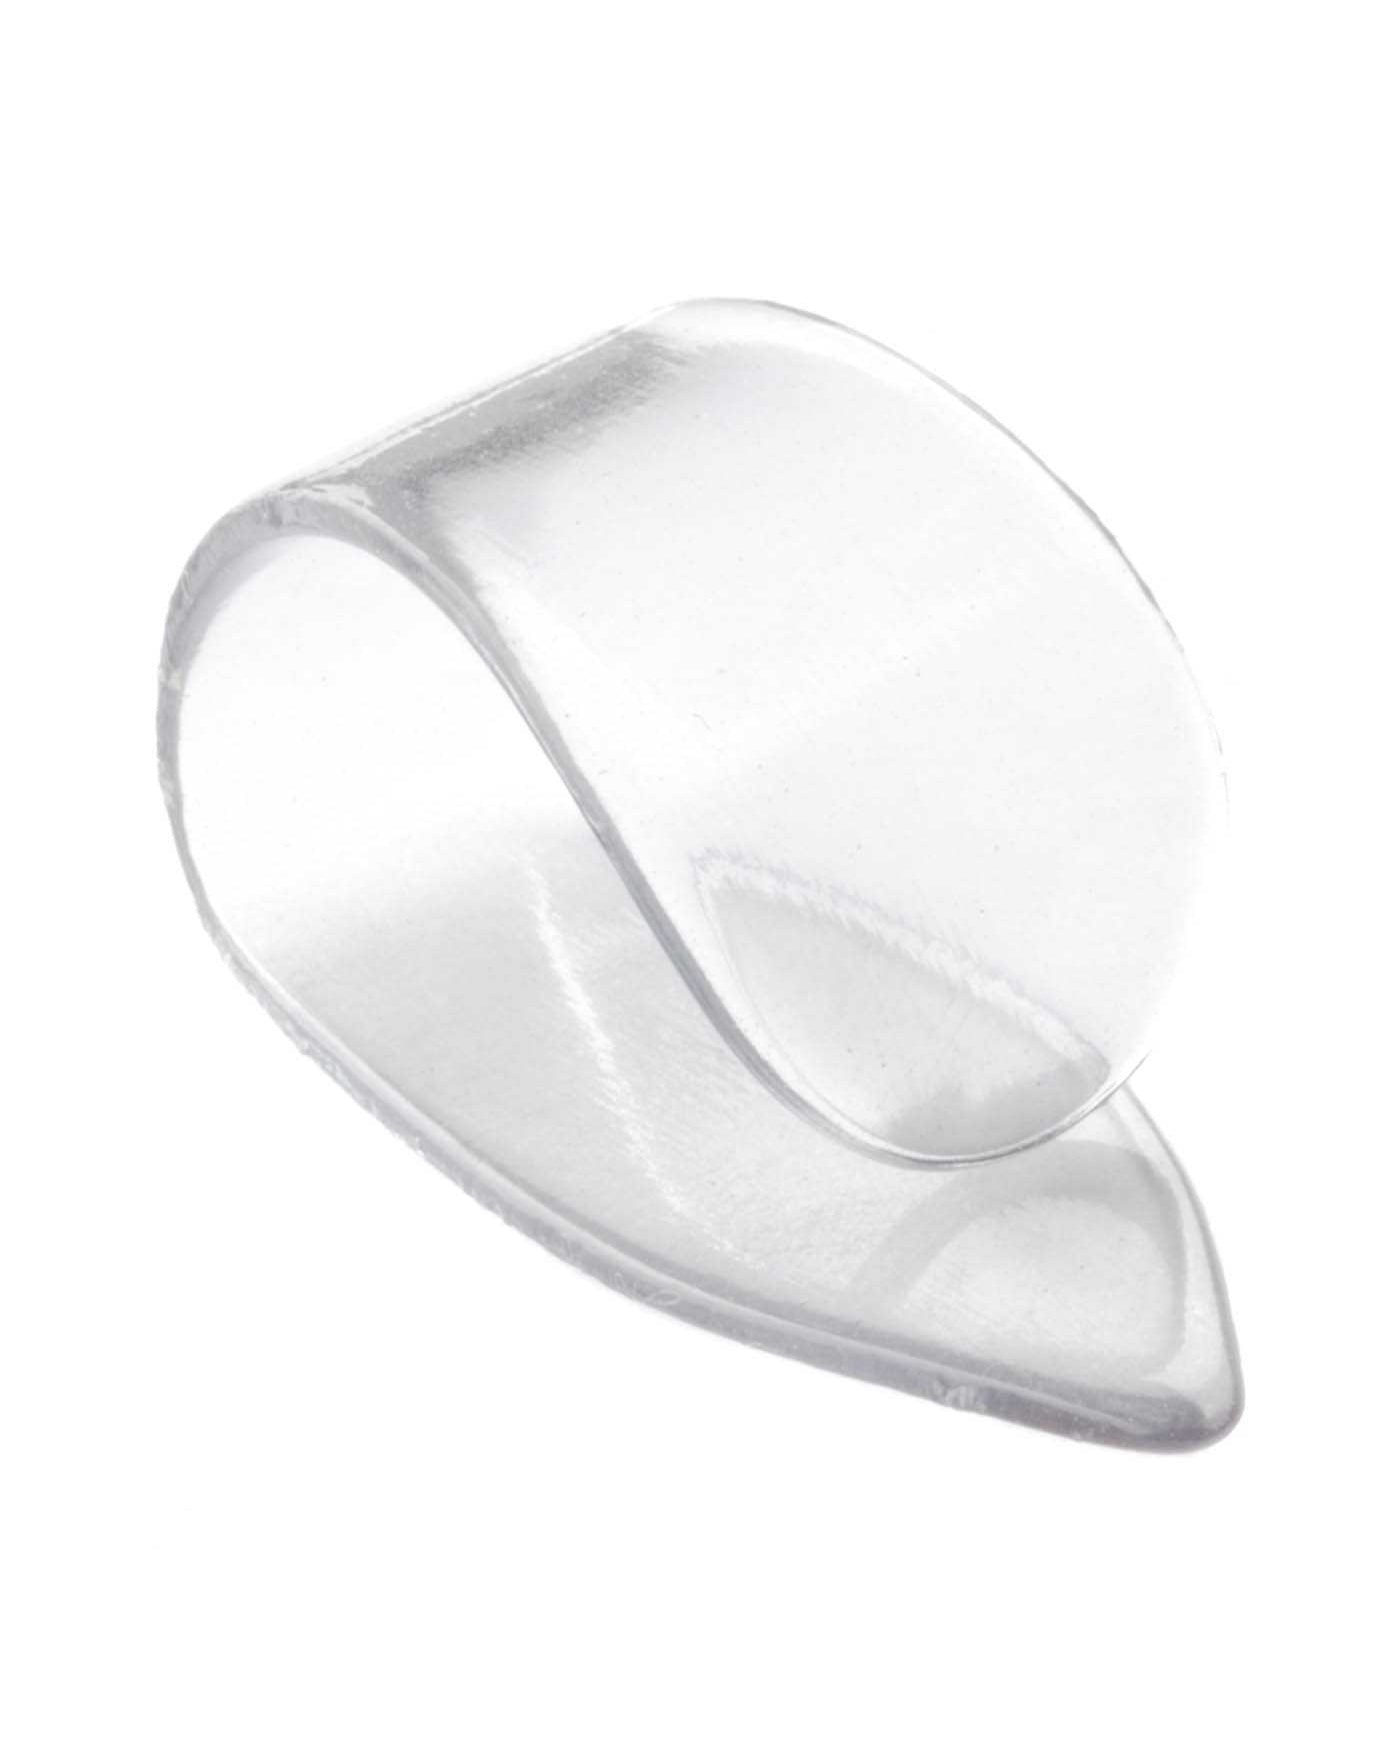 Image 1 of Dunlop Clear "D" Plastic Thumbpick, Medium - SKU# PK37-M : Product Type Accessories & Parts : Elderly Instruments